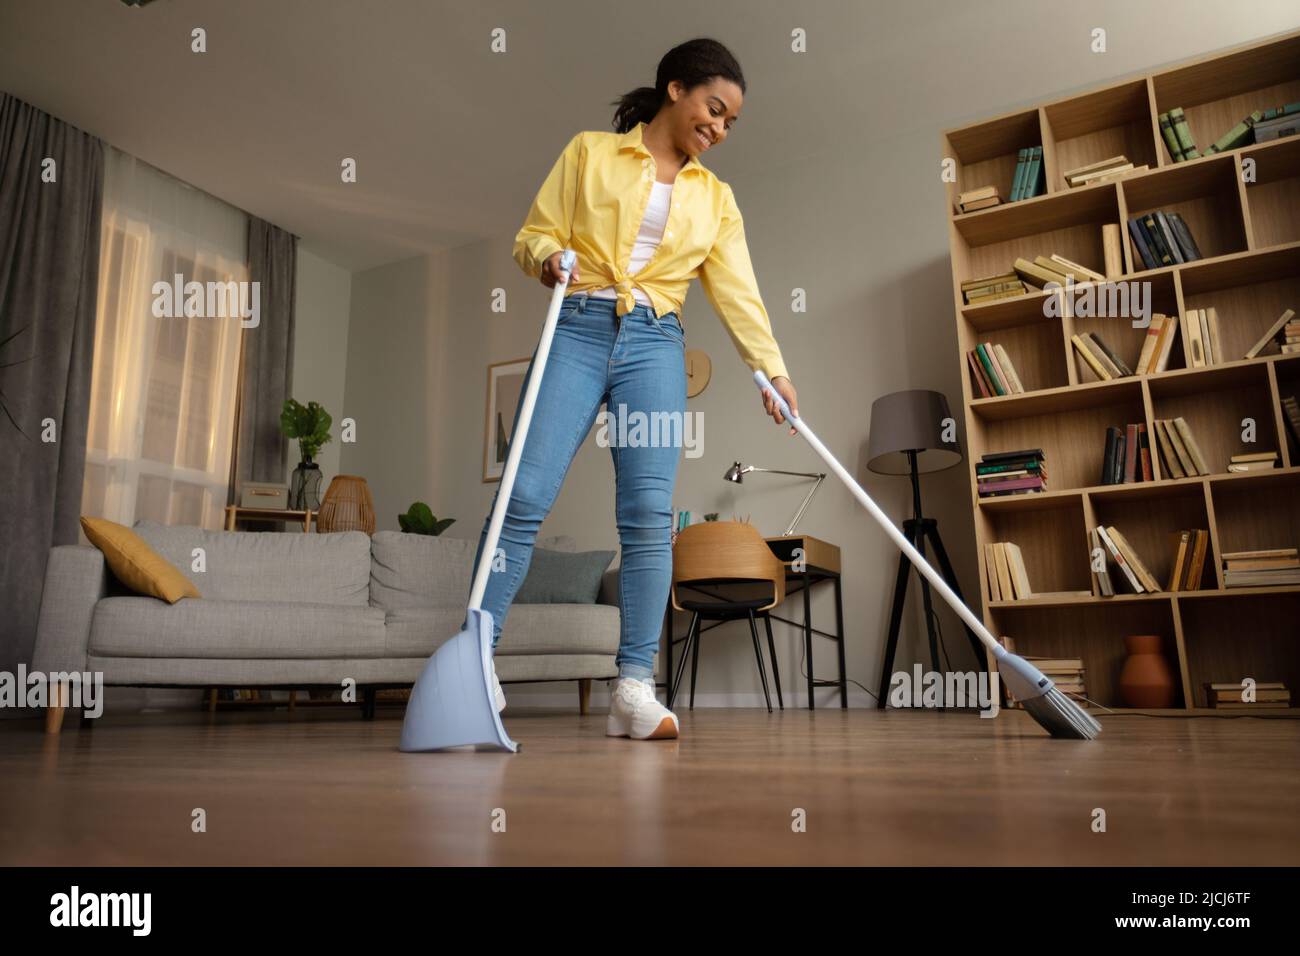 African Lady Sweeping Floor Using Broom And Scoop Cleaning Home Stock Photo